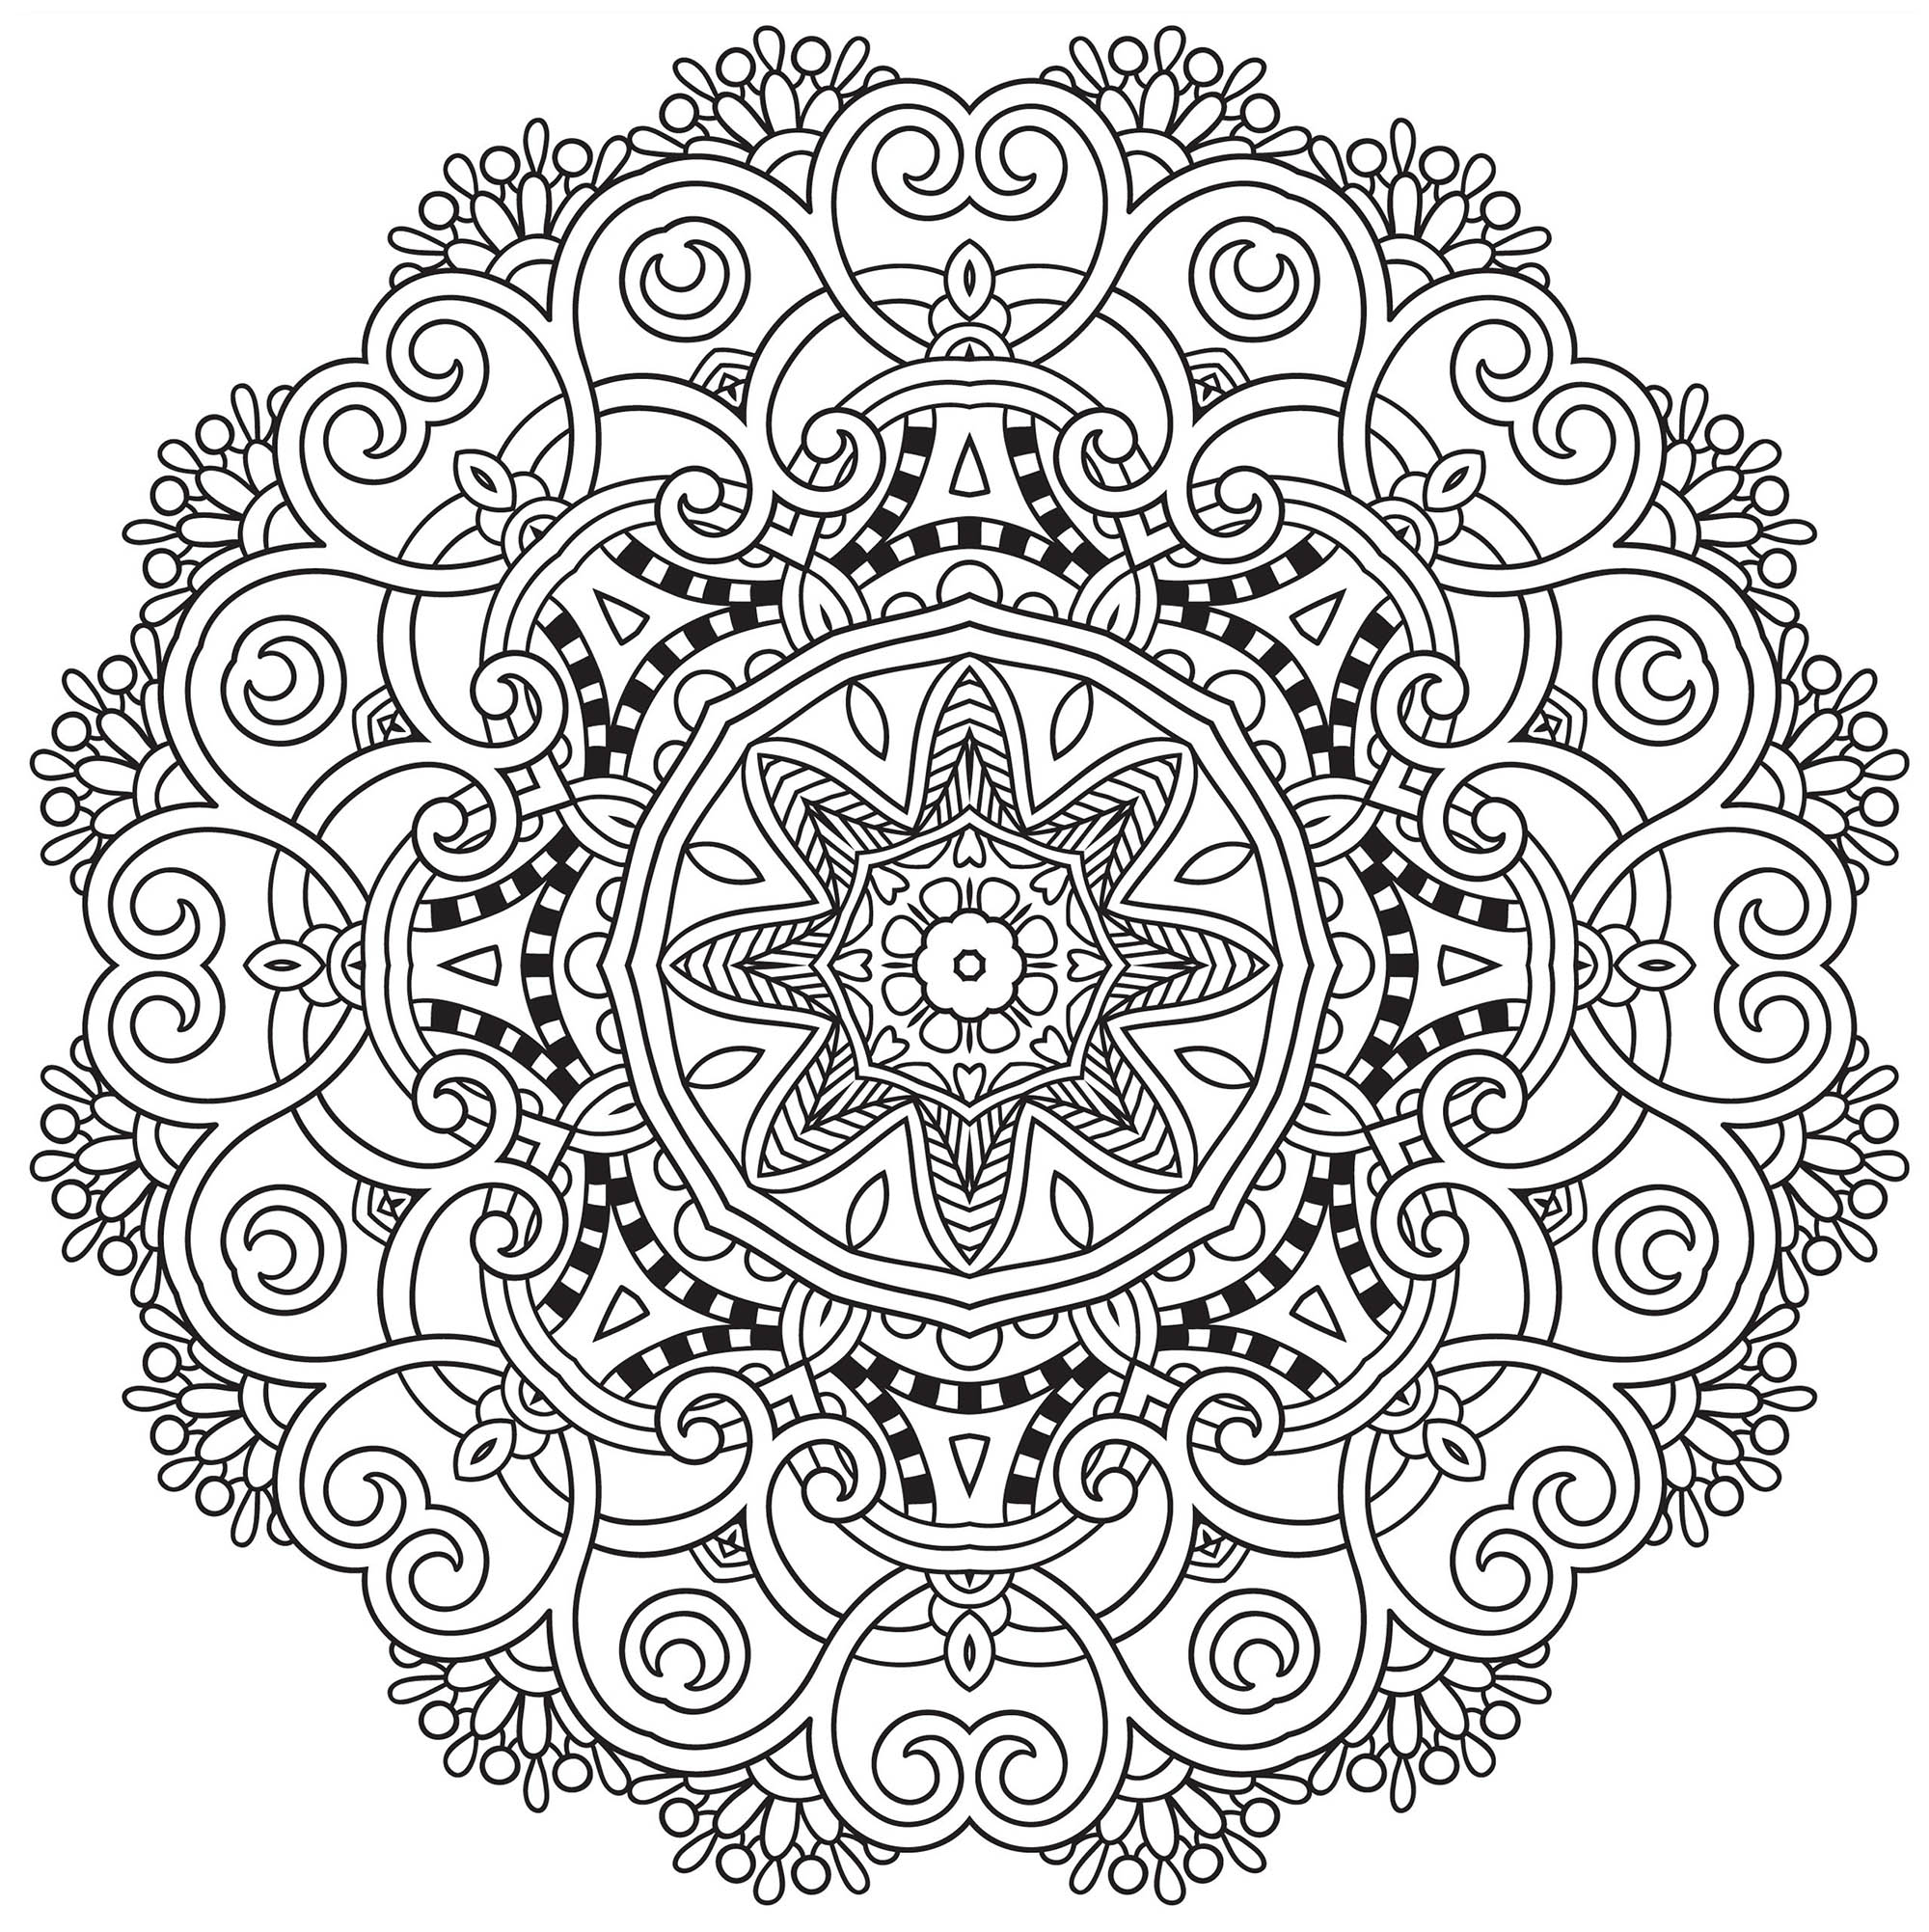 Mandala to download in pdf 2 M alasColoring Pages Page 2